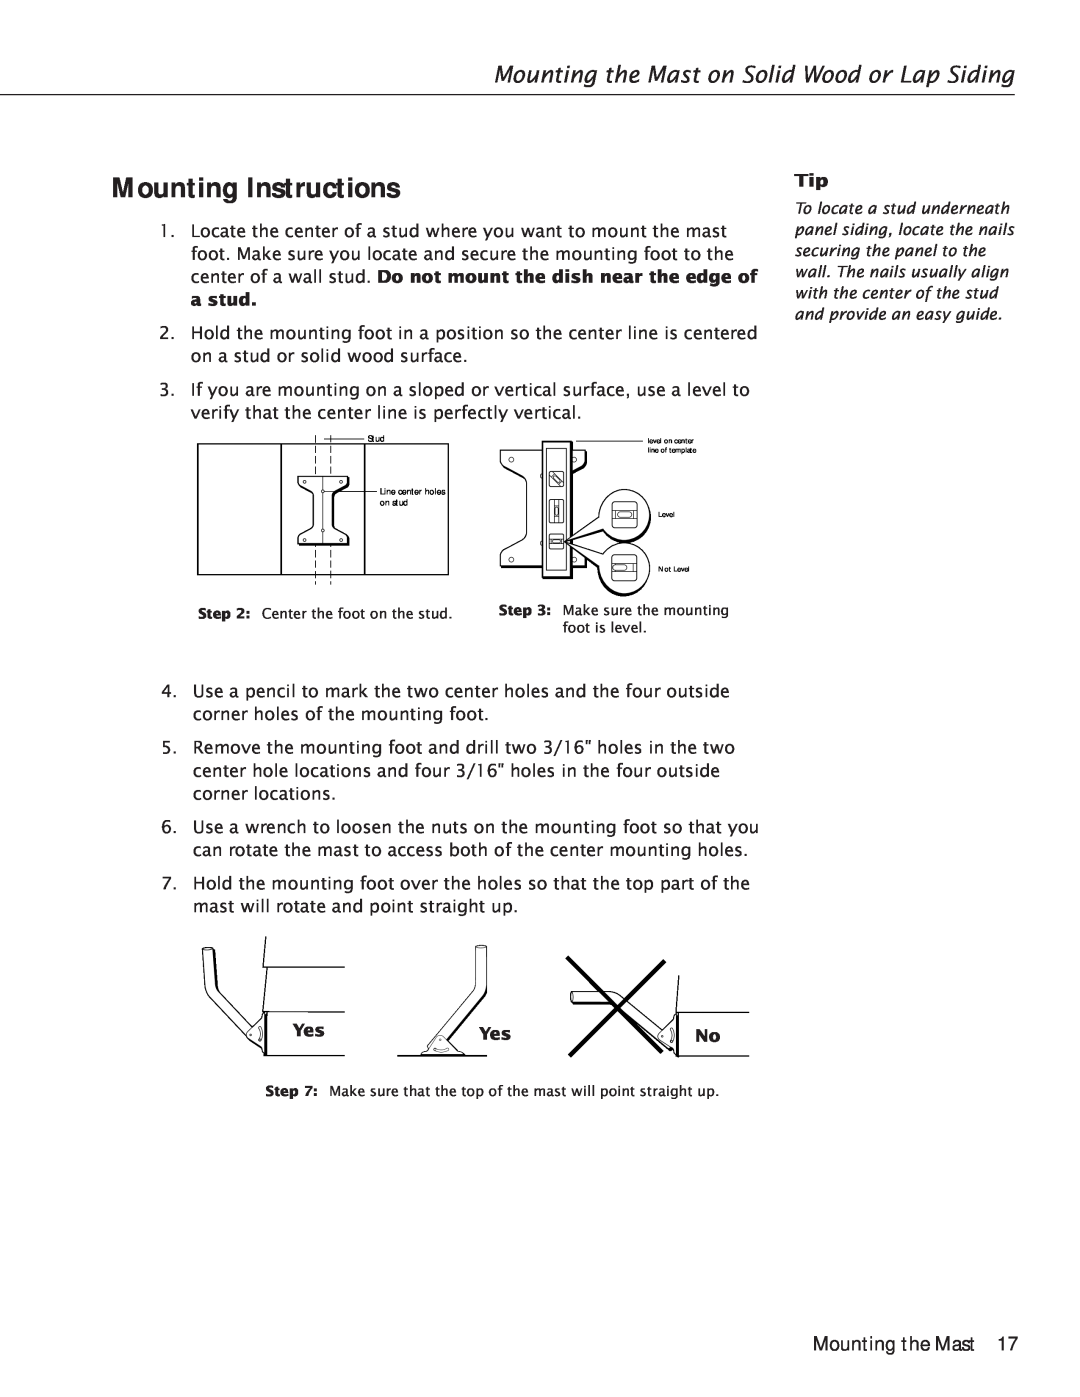 RCA Satellite TV Antenna Mounting Instructions, Mounting the Mast on Solid Wood or Lap Siding, Center the foot on the stud 